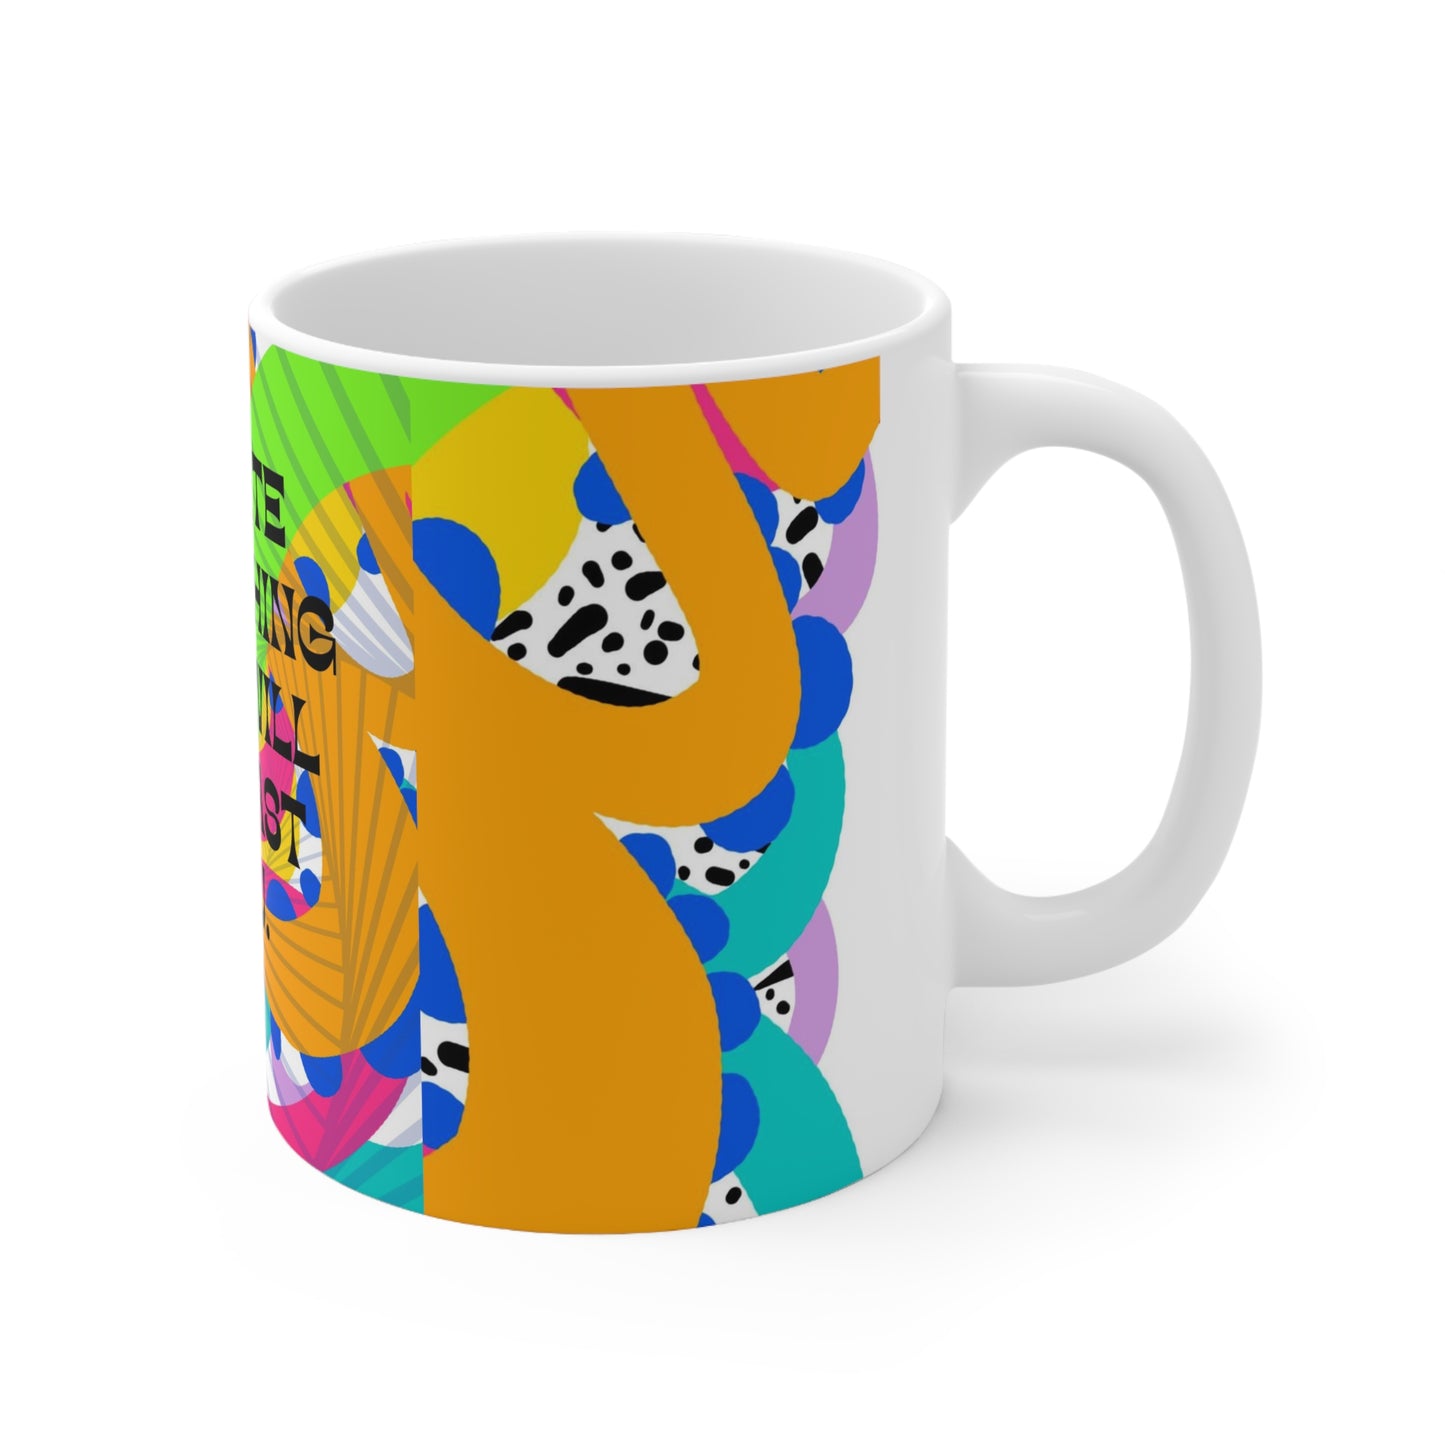 Load image into Gallery viewer, ABL Inspirational Ceramic Mug 11oz- &amp;quot; Create Something...&amp;quot;